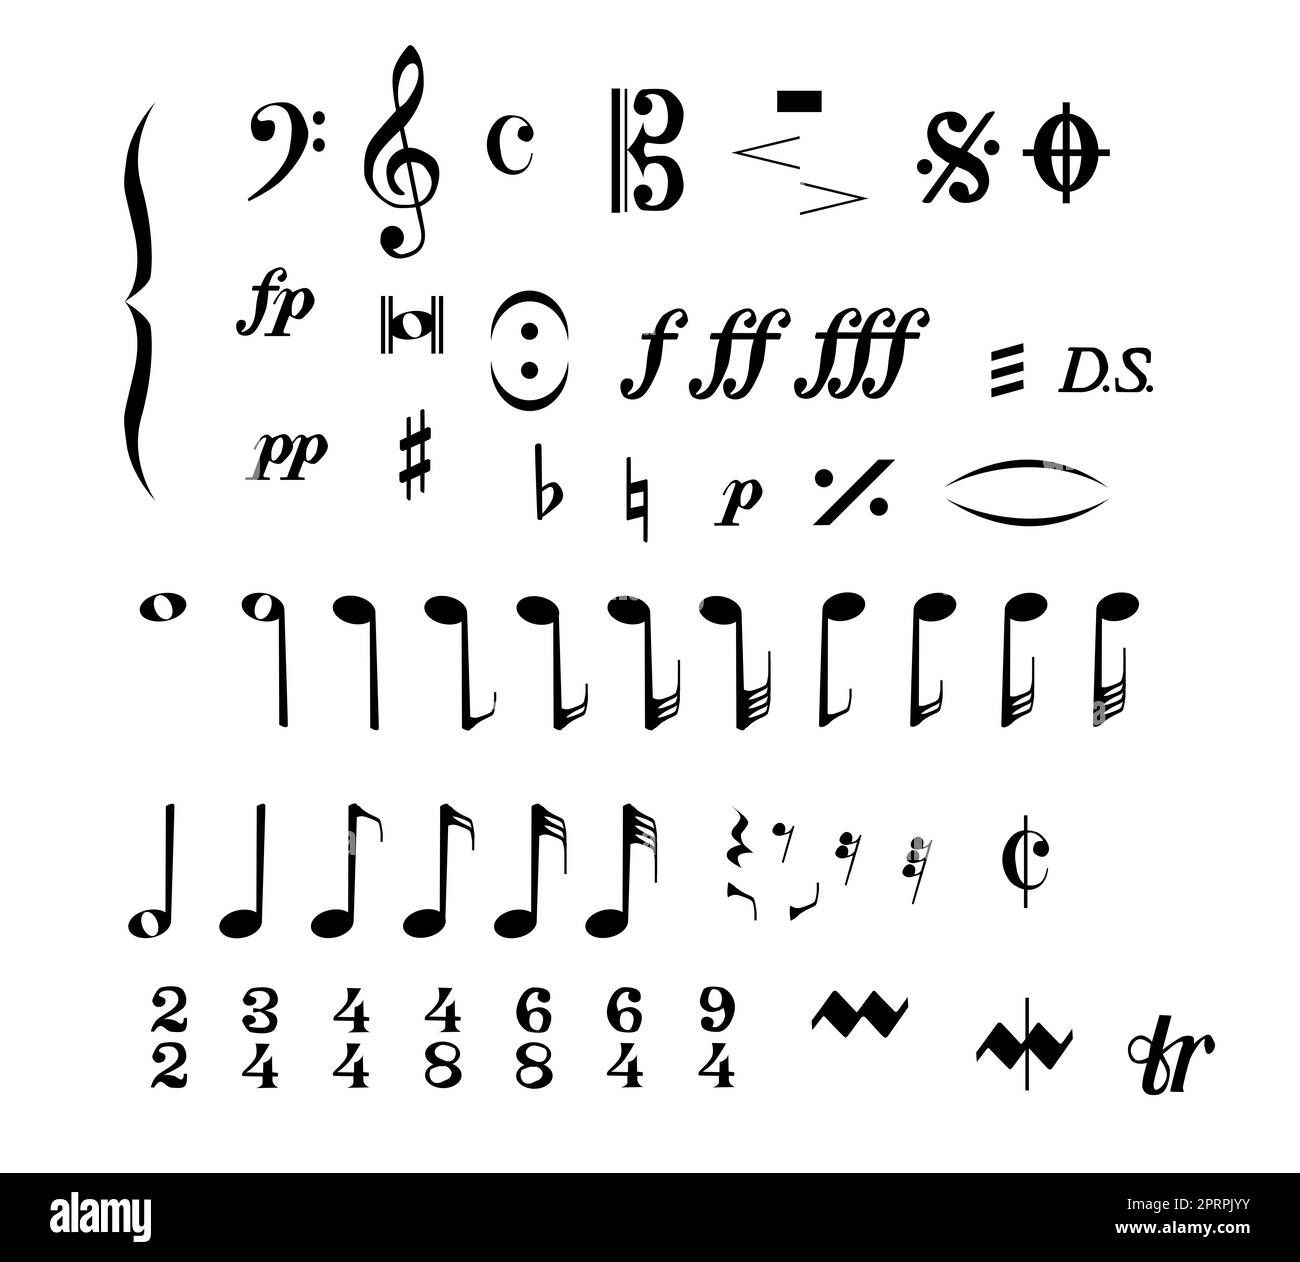 A collection of musical notes and symbols isolated on a white background Stock Photo